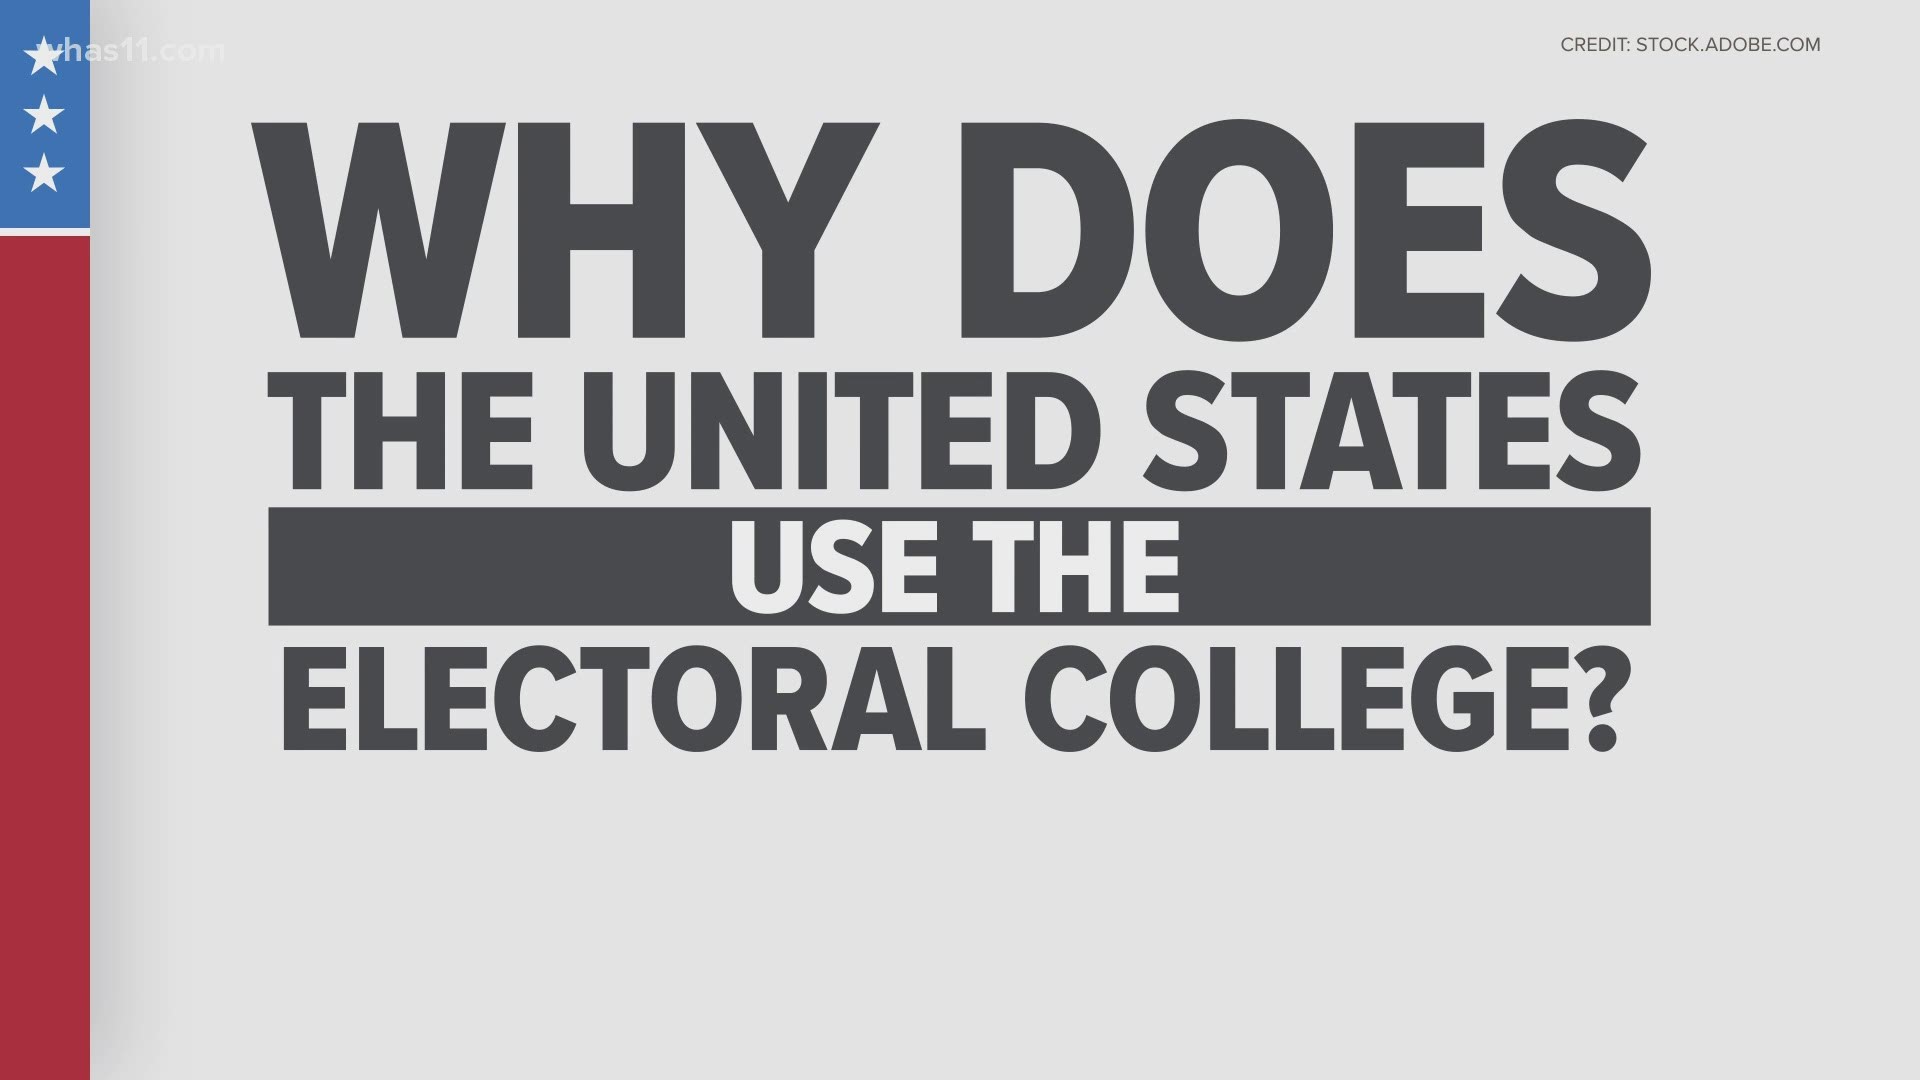 As election day draws near, we are taking a closer look at the United States Electoral College.